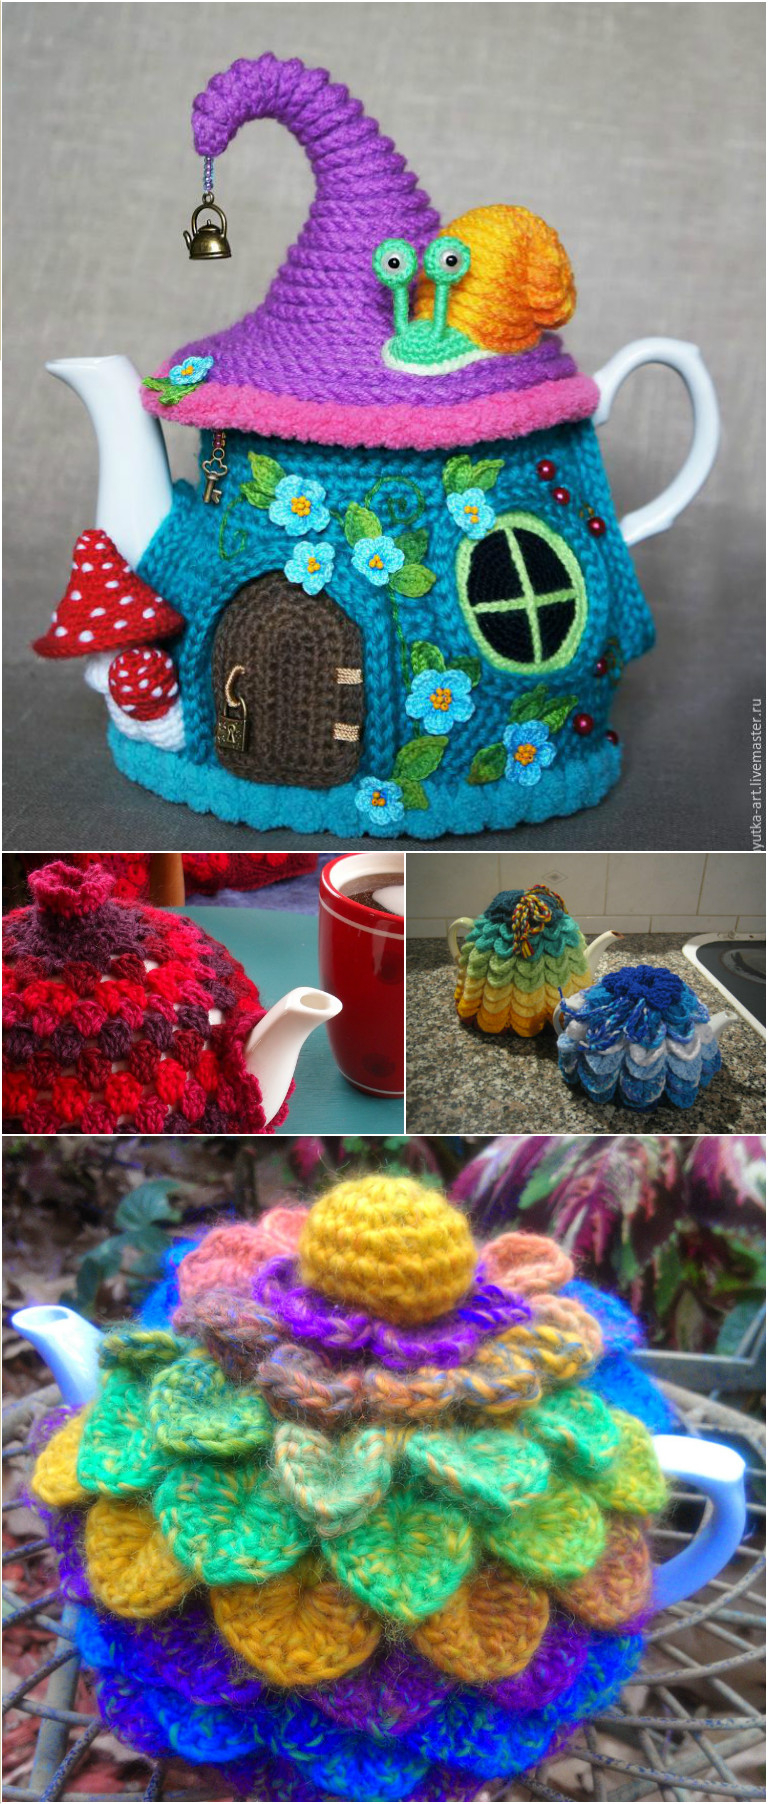 Tea Cosy Patterns To Knit These Fairy House Tea Cosy Patterns Are Absolutely Button Cute Pondic